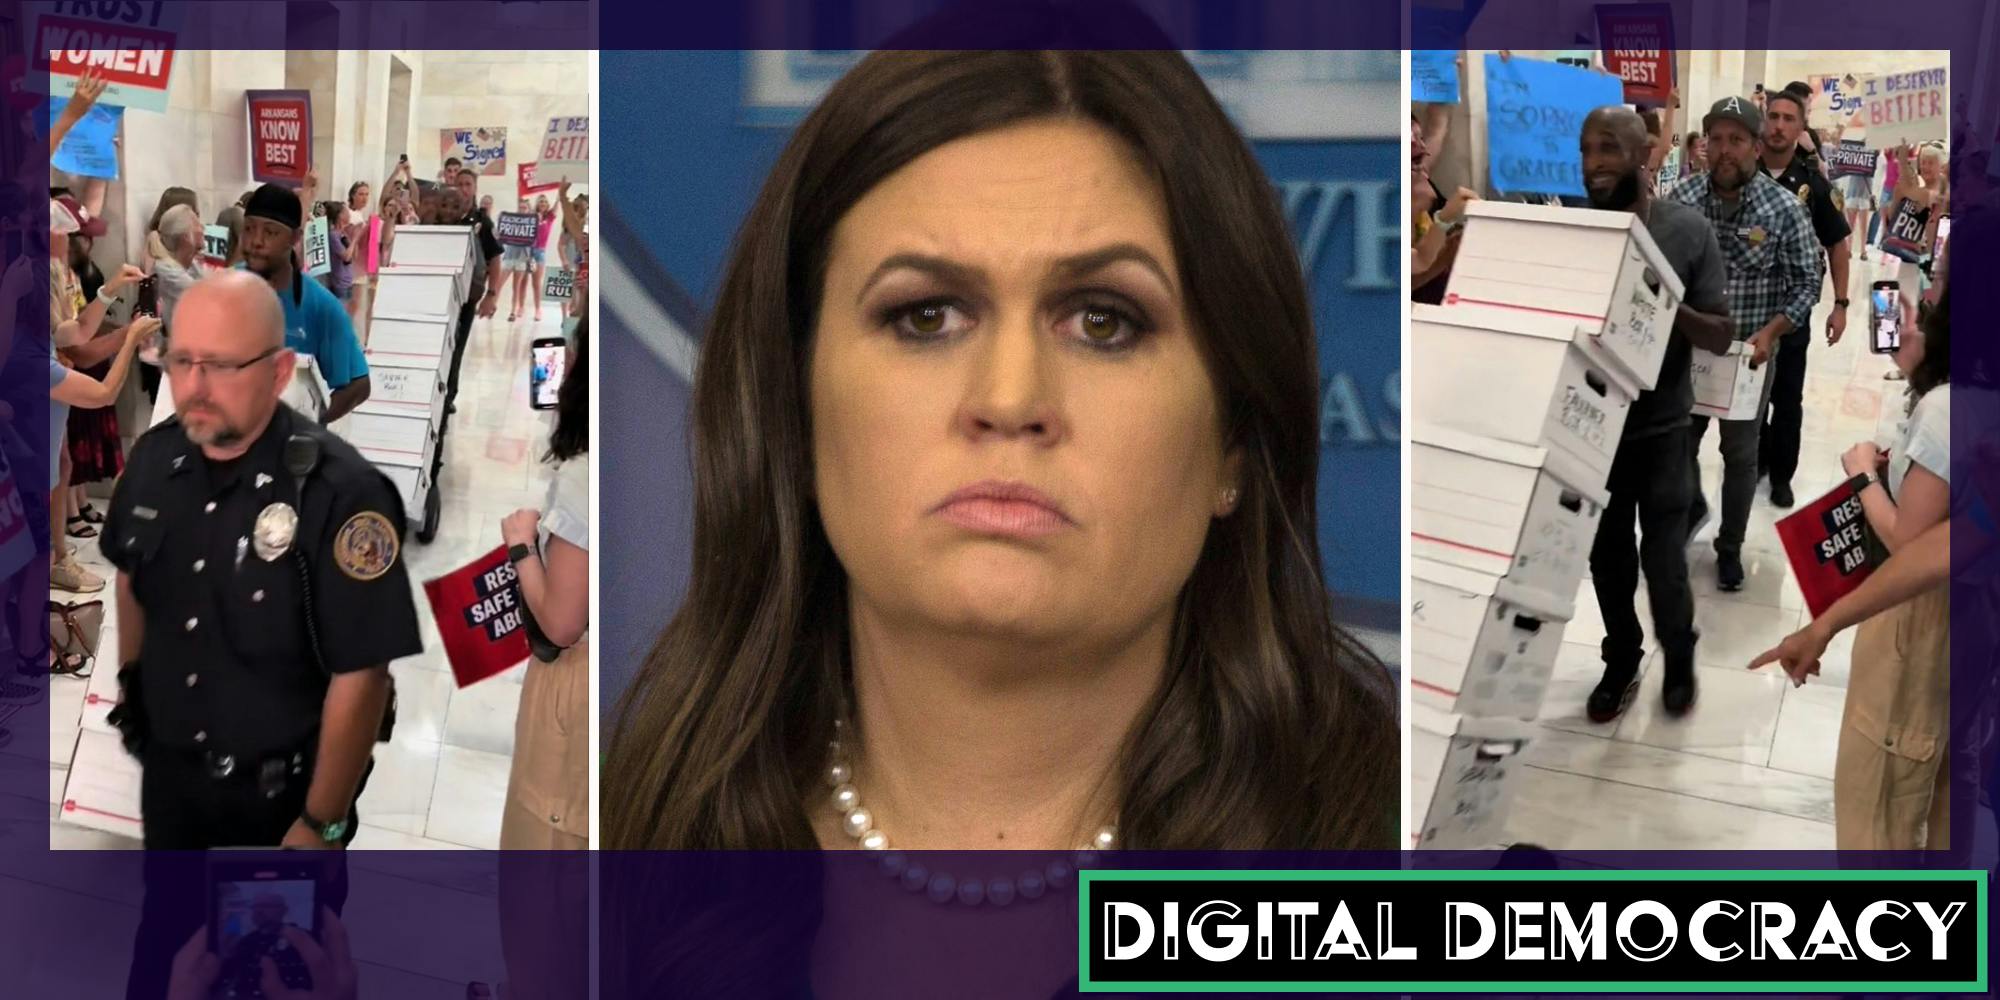 men hand-trucking stacks of boxes into building (l & r) sarah huckabee sanders (c). There is a logo that says 'Digital Democracy' in a web_crawlr font in the bottom right corner.